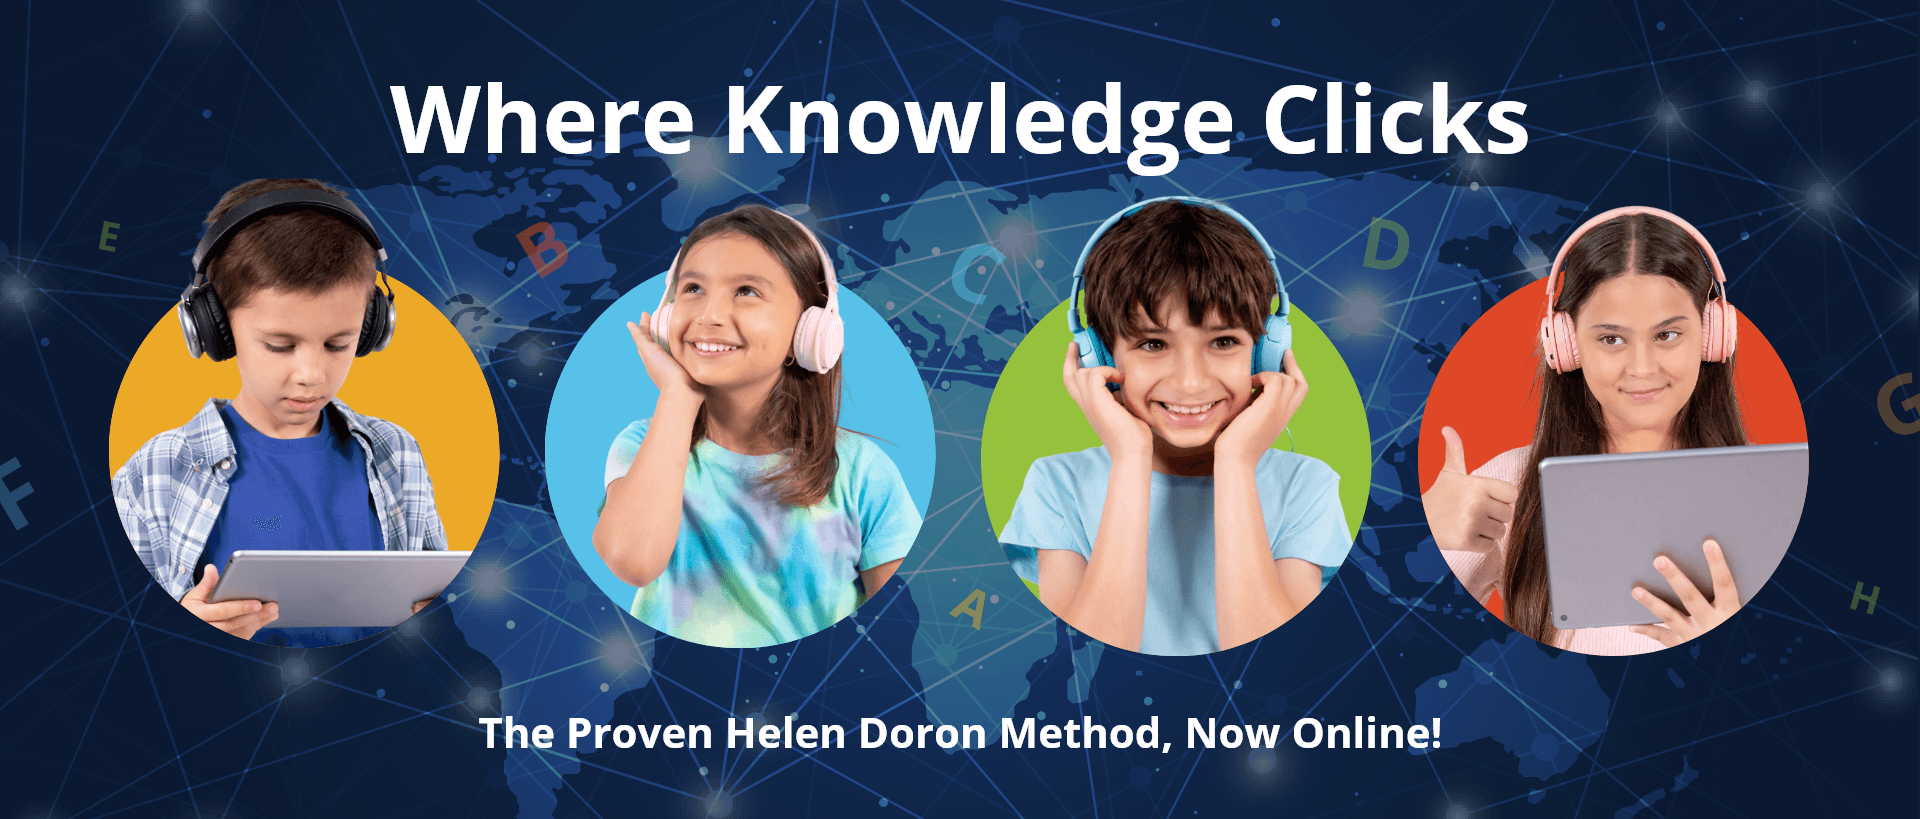 Helen doron connect - Online english lessons